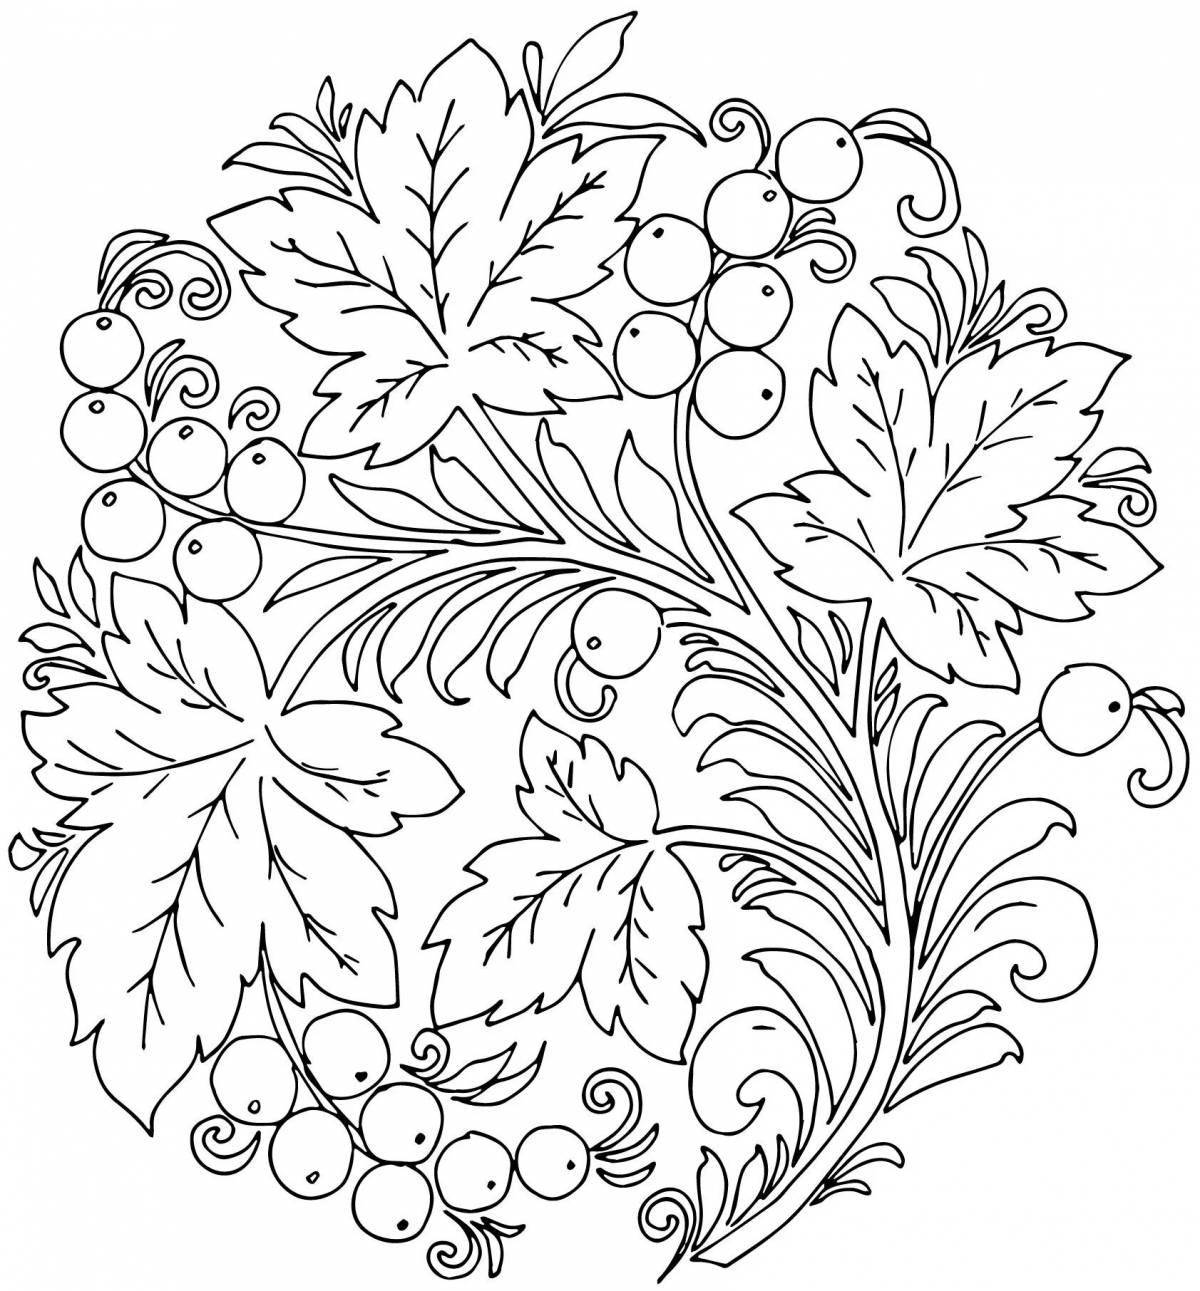 Amazing coloring pages with Khokhloma patterns